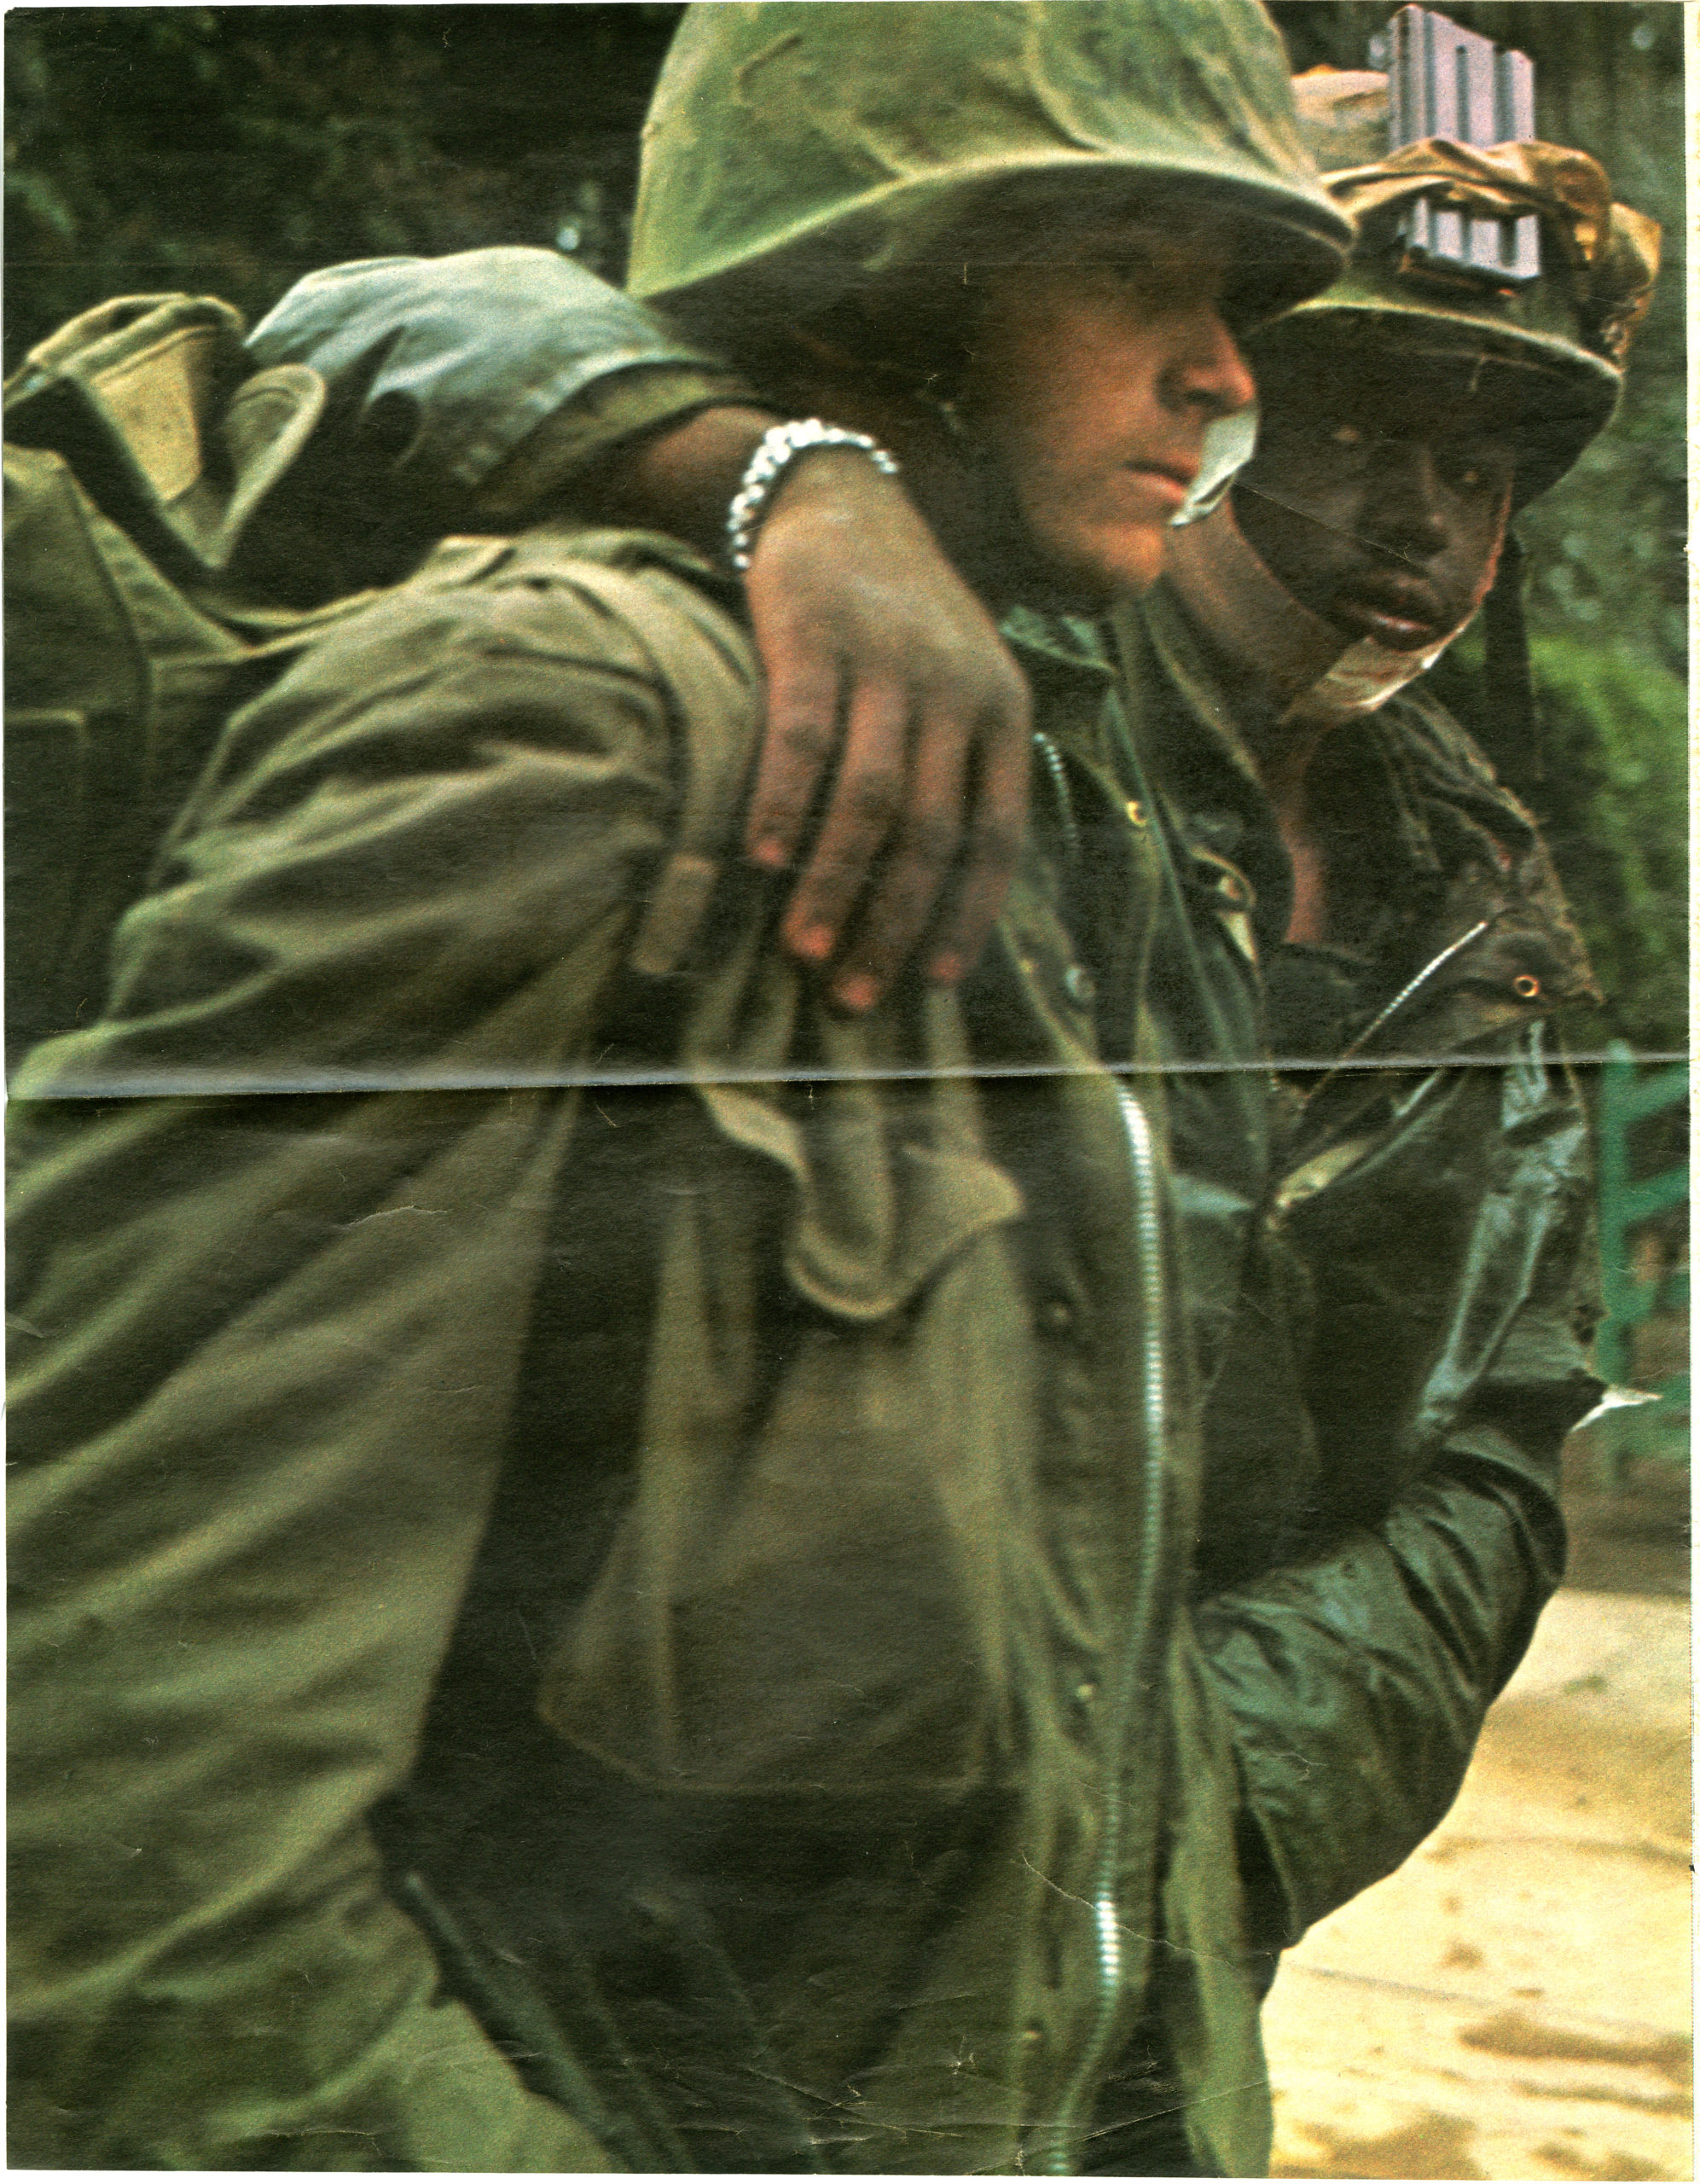 Photo of White and African-American Soldiers, George Alexander Sewell, circa 1967-1969, George A. Sewell papers